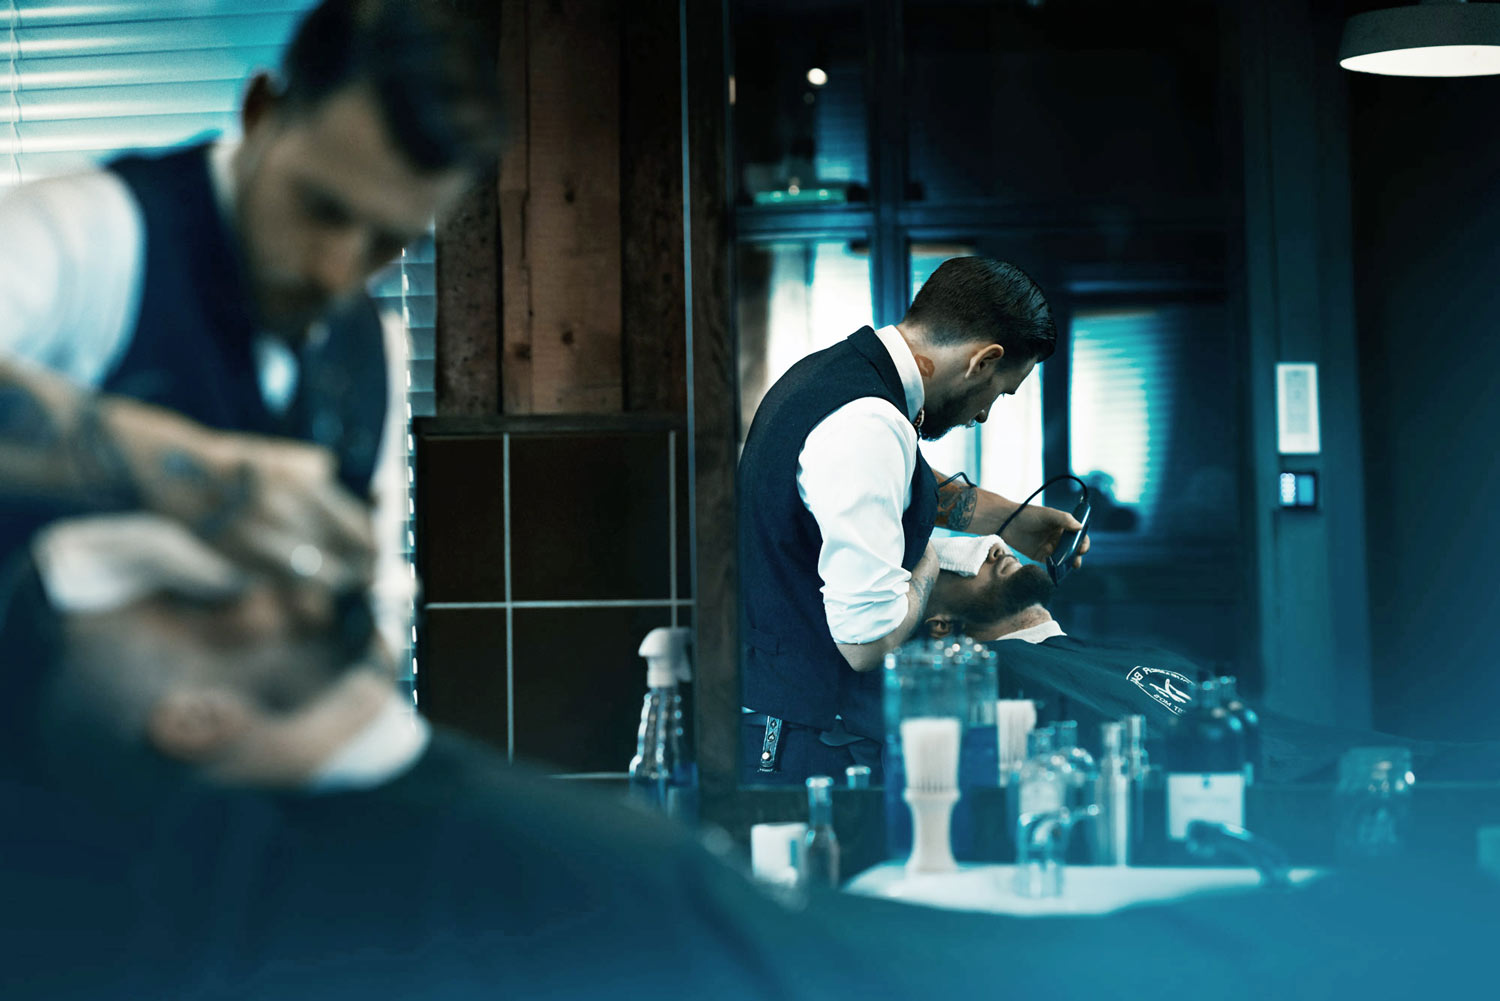 A portrait of a barber, from a cinematic story about the barber. Shot at Pels Pels in Oslo. 